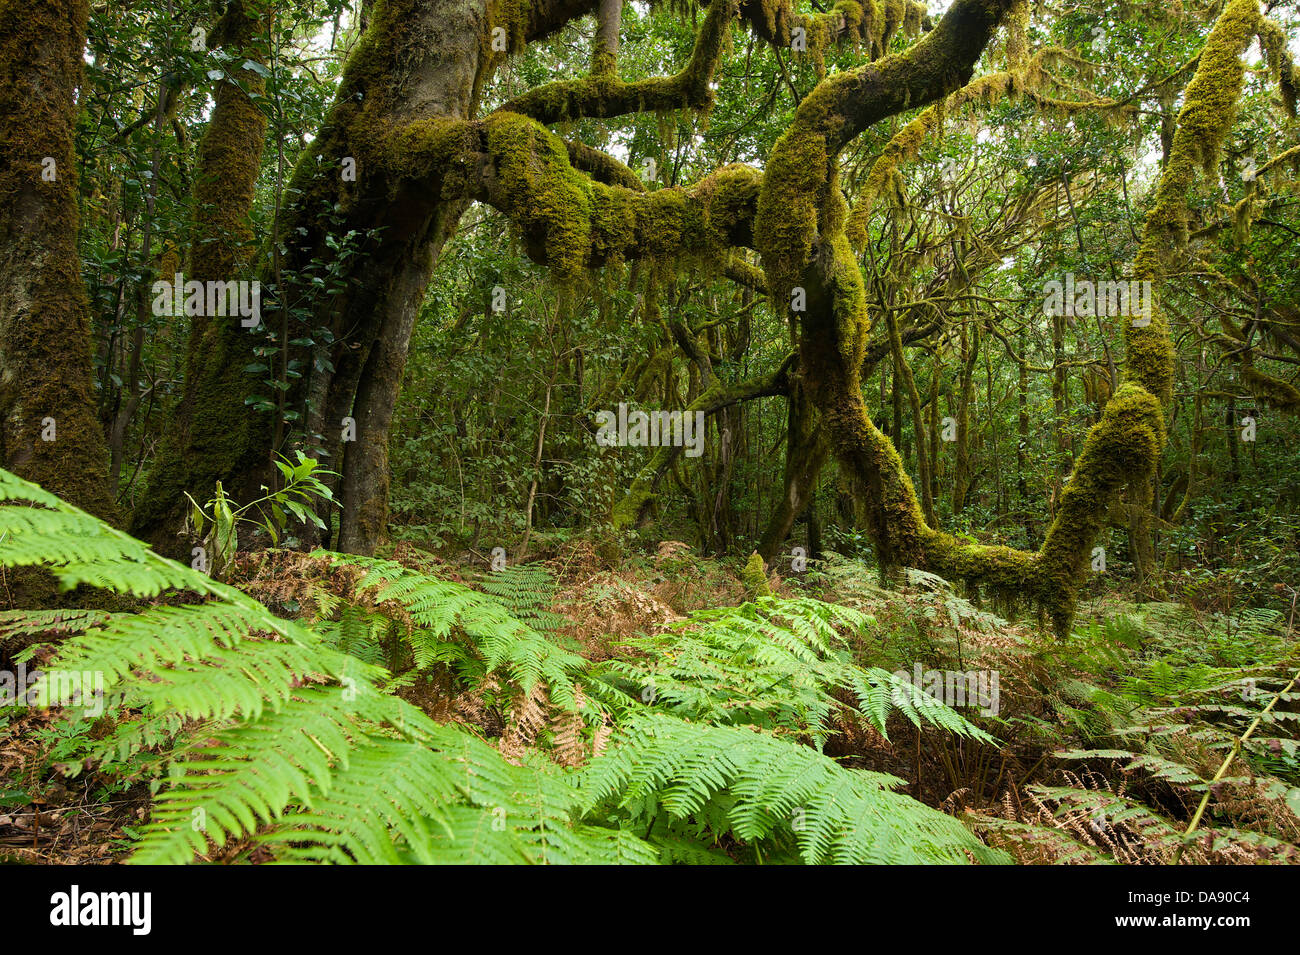 Canaries, Europe, Canary islands, La Gomera, Spain, outside, day, nobody, laurel wood, wood, forest, national park, national par Stock Photo